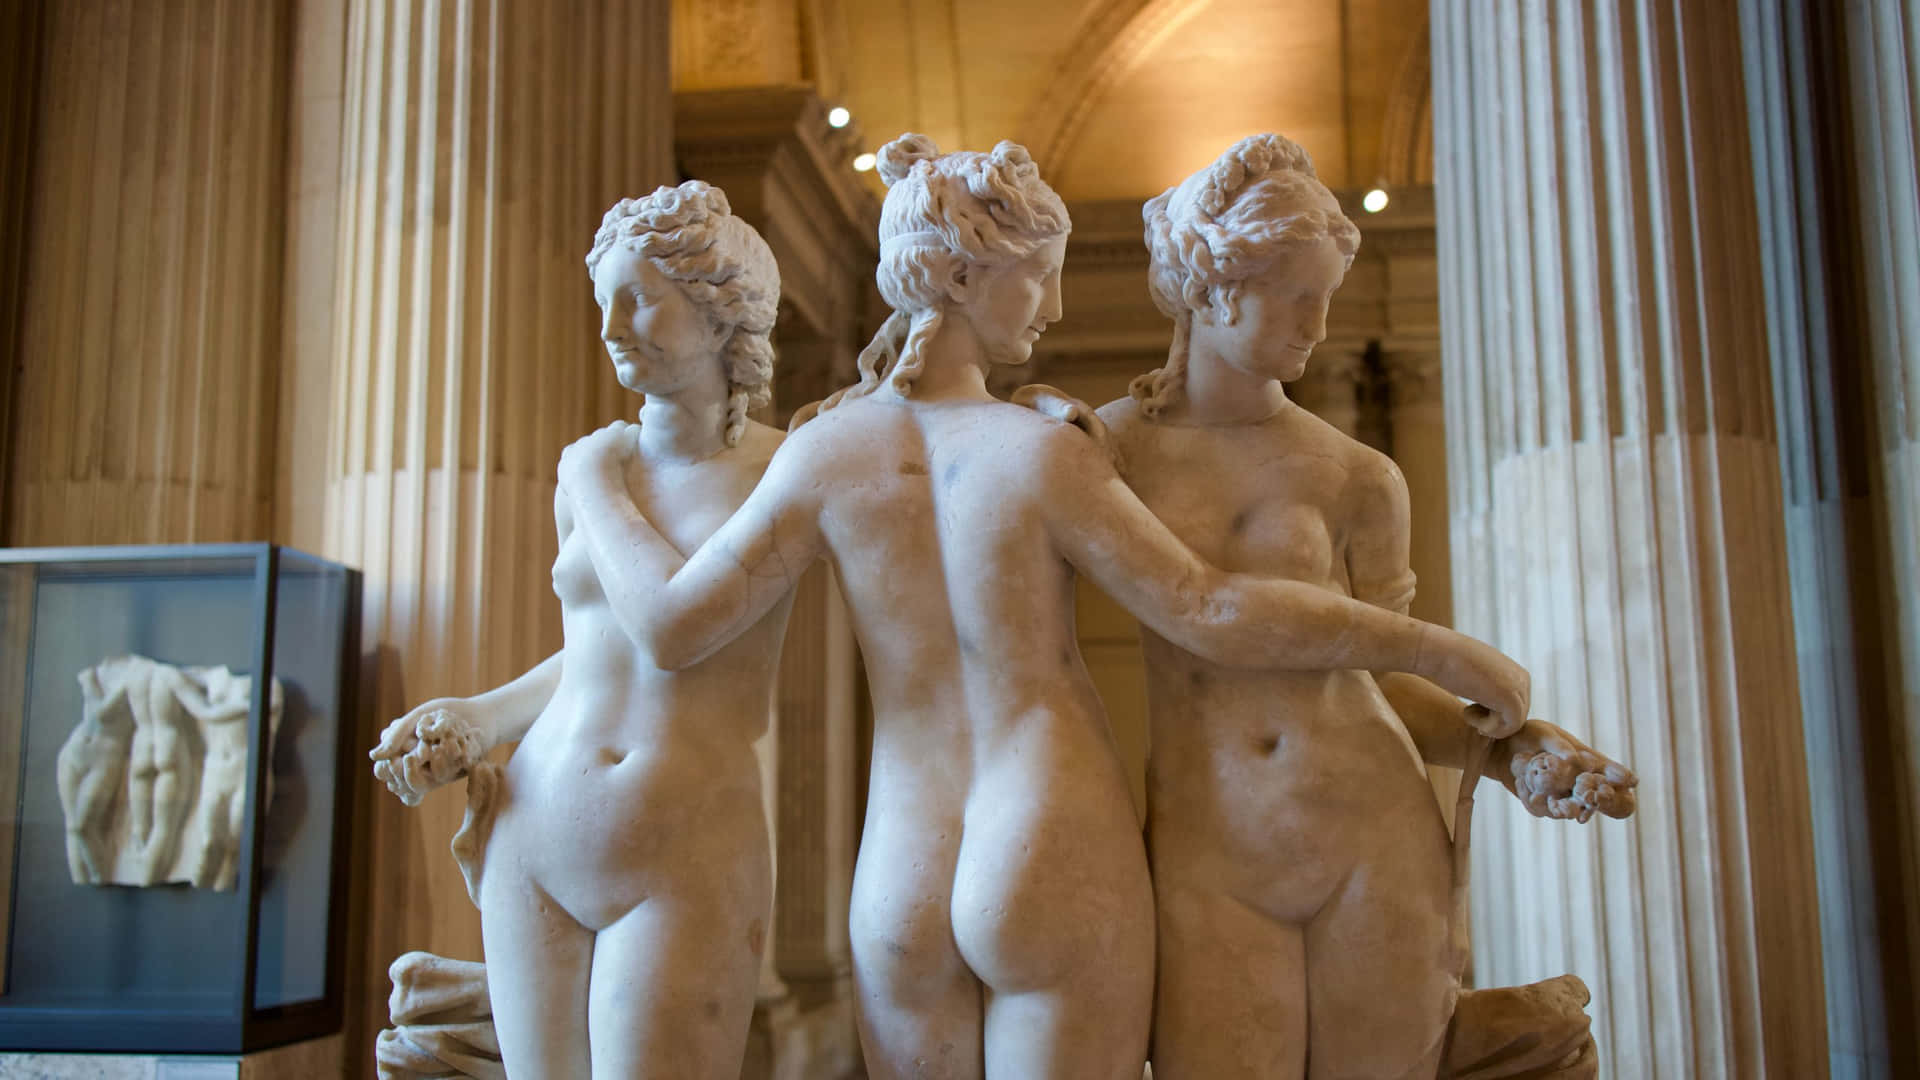 Three Statues Of Nudes In A Museum